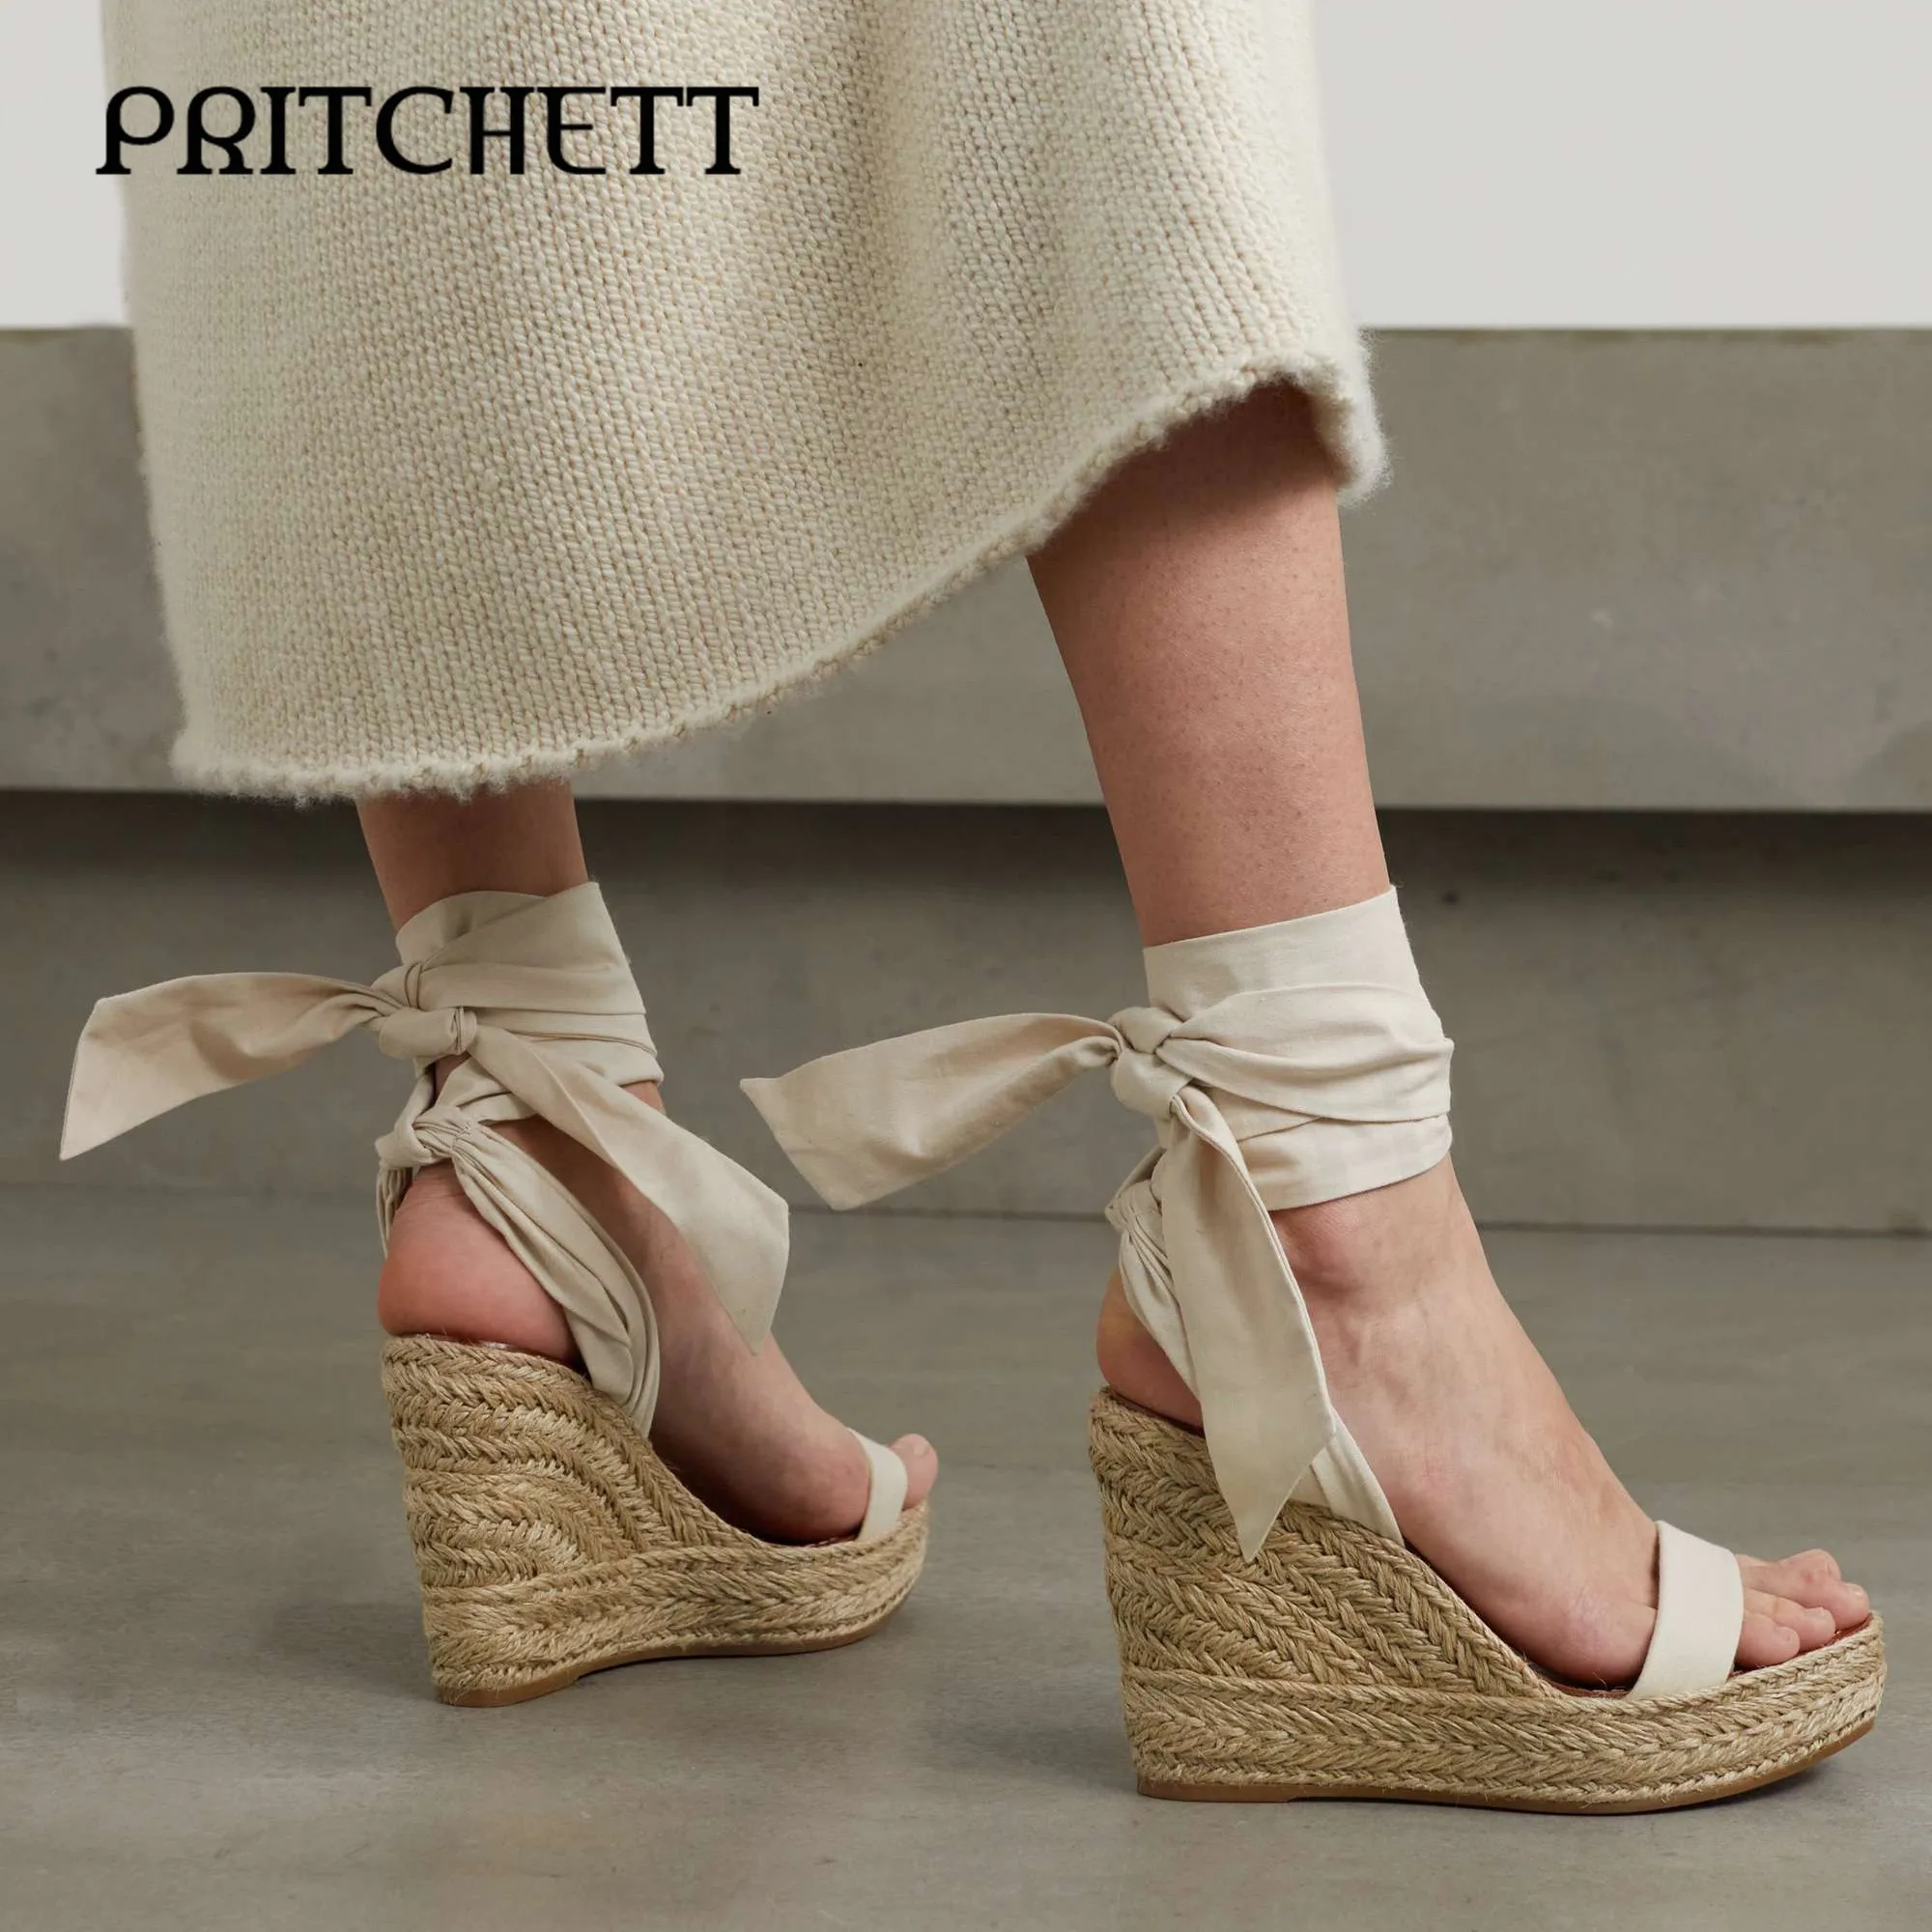 

White Cotton Canvas Espadrille Wedge Sandals Round Toe Wedge High Heel Sandals Temperament Comfortable Ankle Strap Women's Shoes